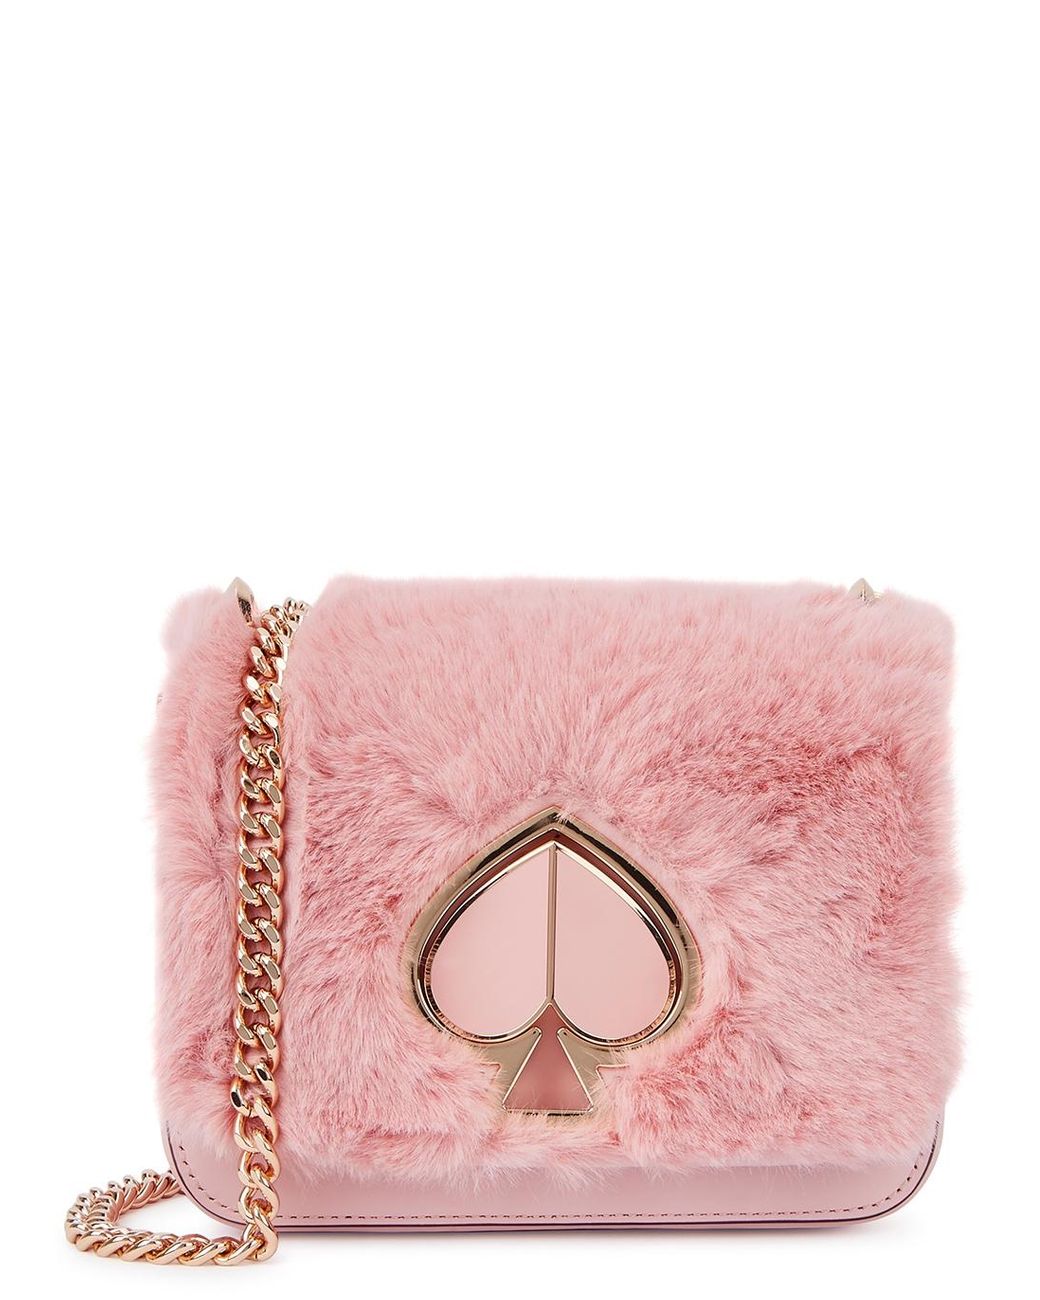 Kate Spade Nicola Small Faux Fur And Leather Shoulder Bag in Pink | Lyst